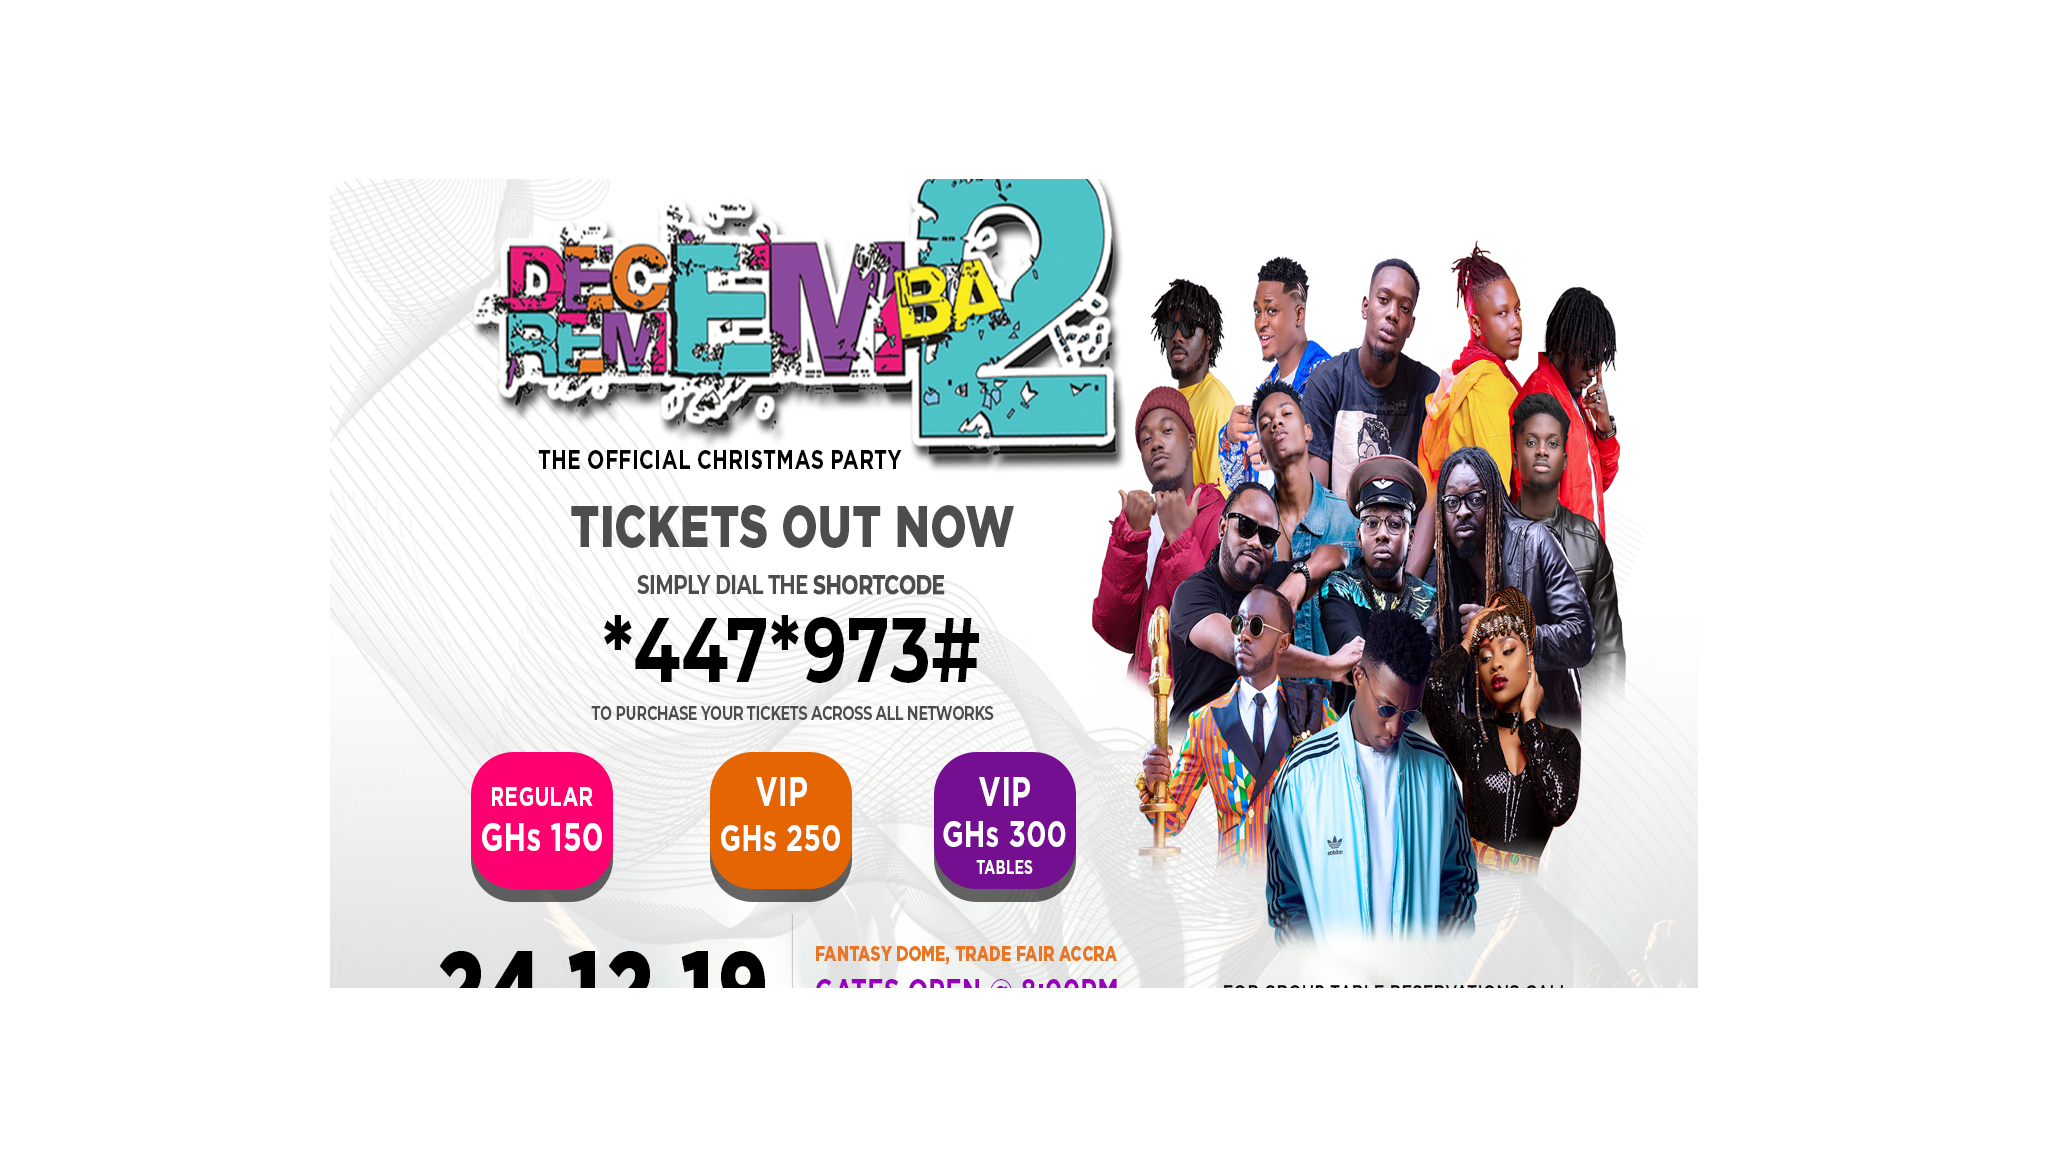 2019 Decemba 2 Rememba concert: Ticket procedures, full list of performers announcedTickets are being sold for GHc 150 (Regular), GHc 250 (VIP) and GHc 300 (VIP with tables).through shortcodes.